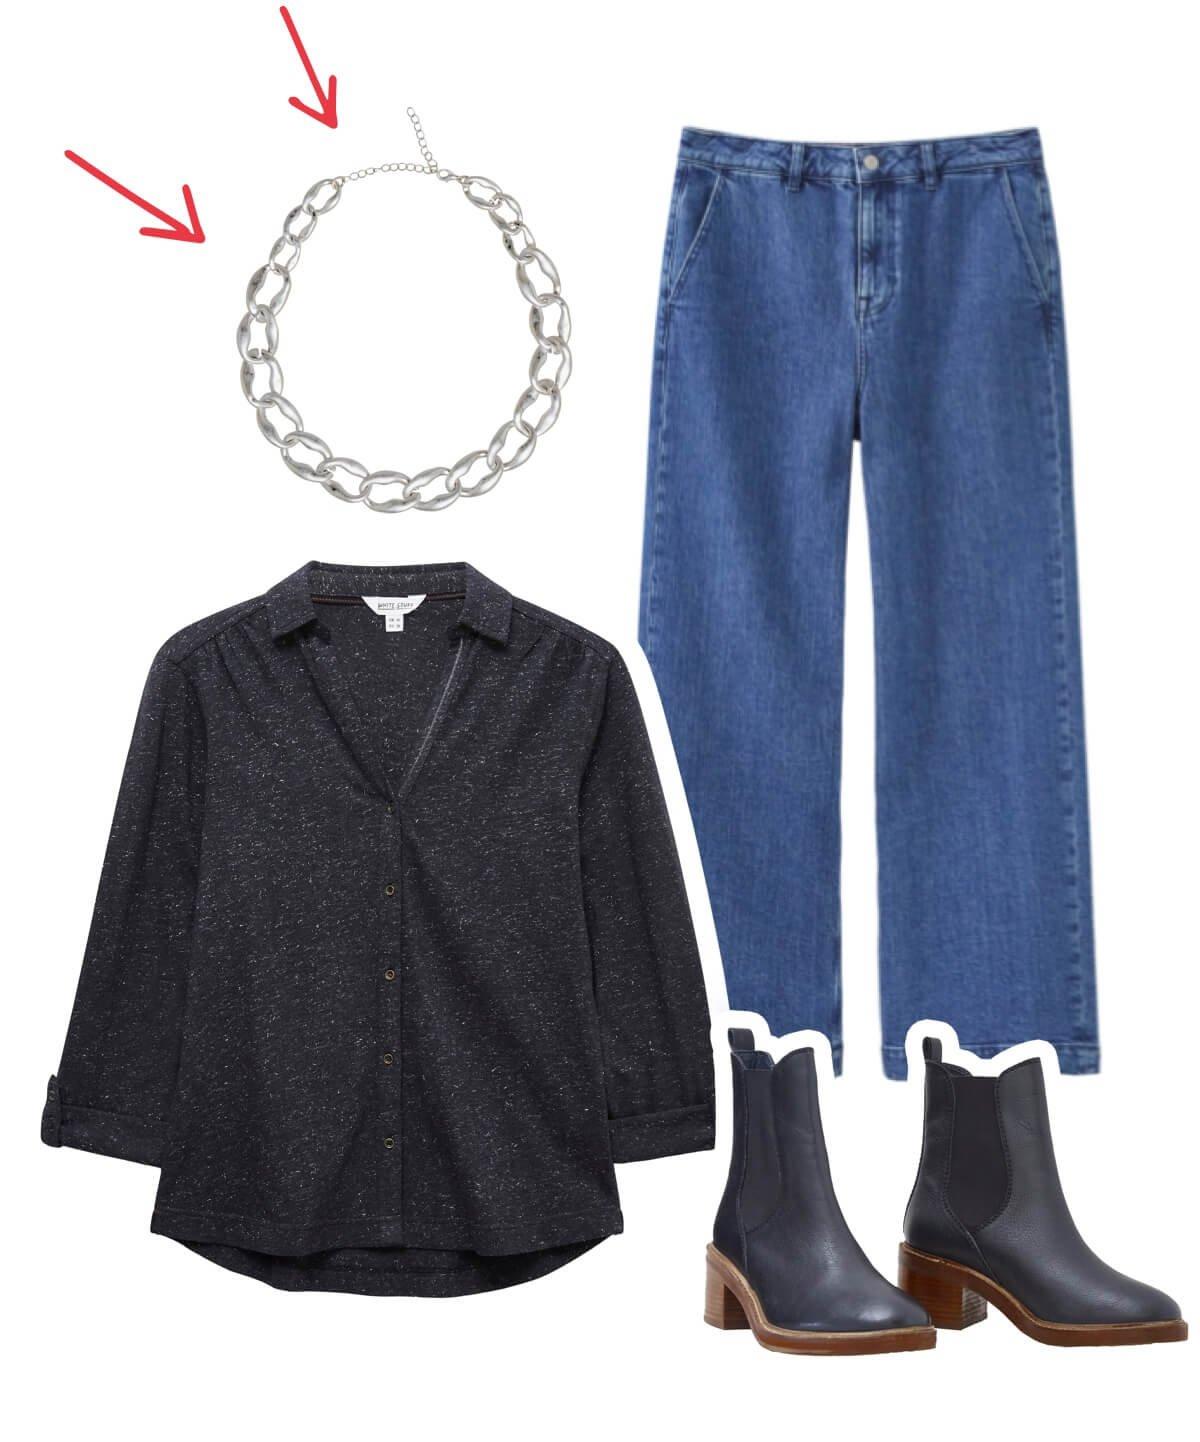 christmaspartywearguide_outfit1